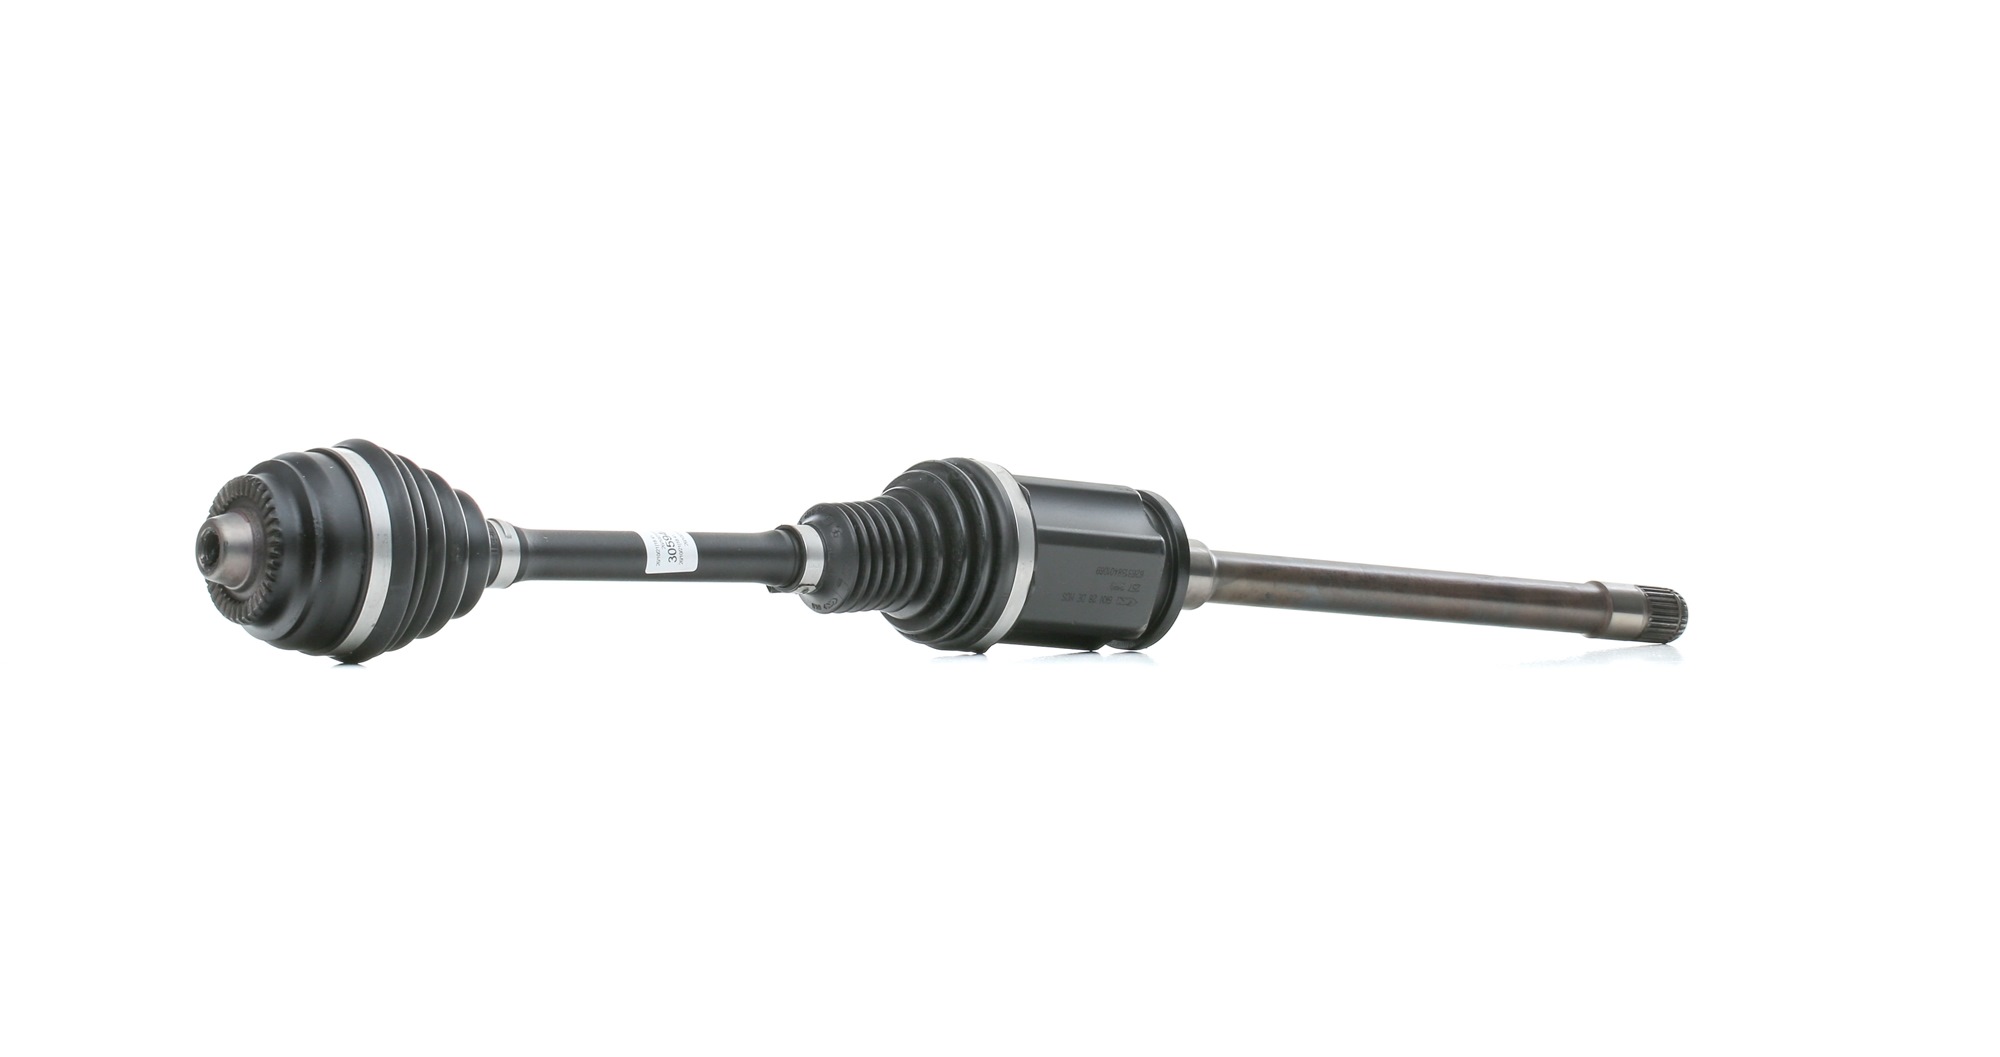 305946 LÖBRO CV axle BMW 869, 378mm, without bearing, without fastening material